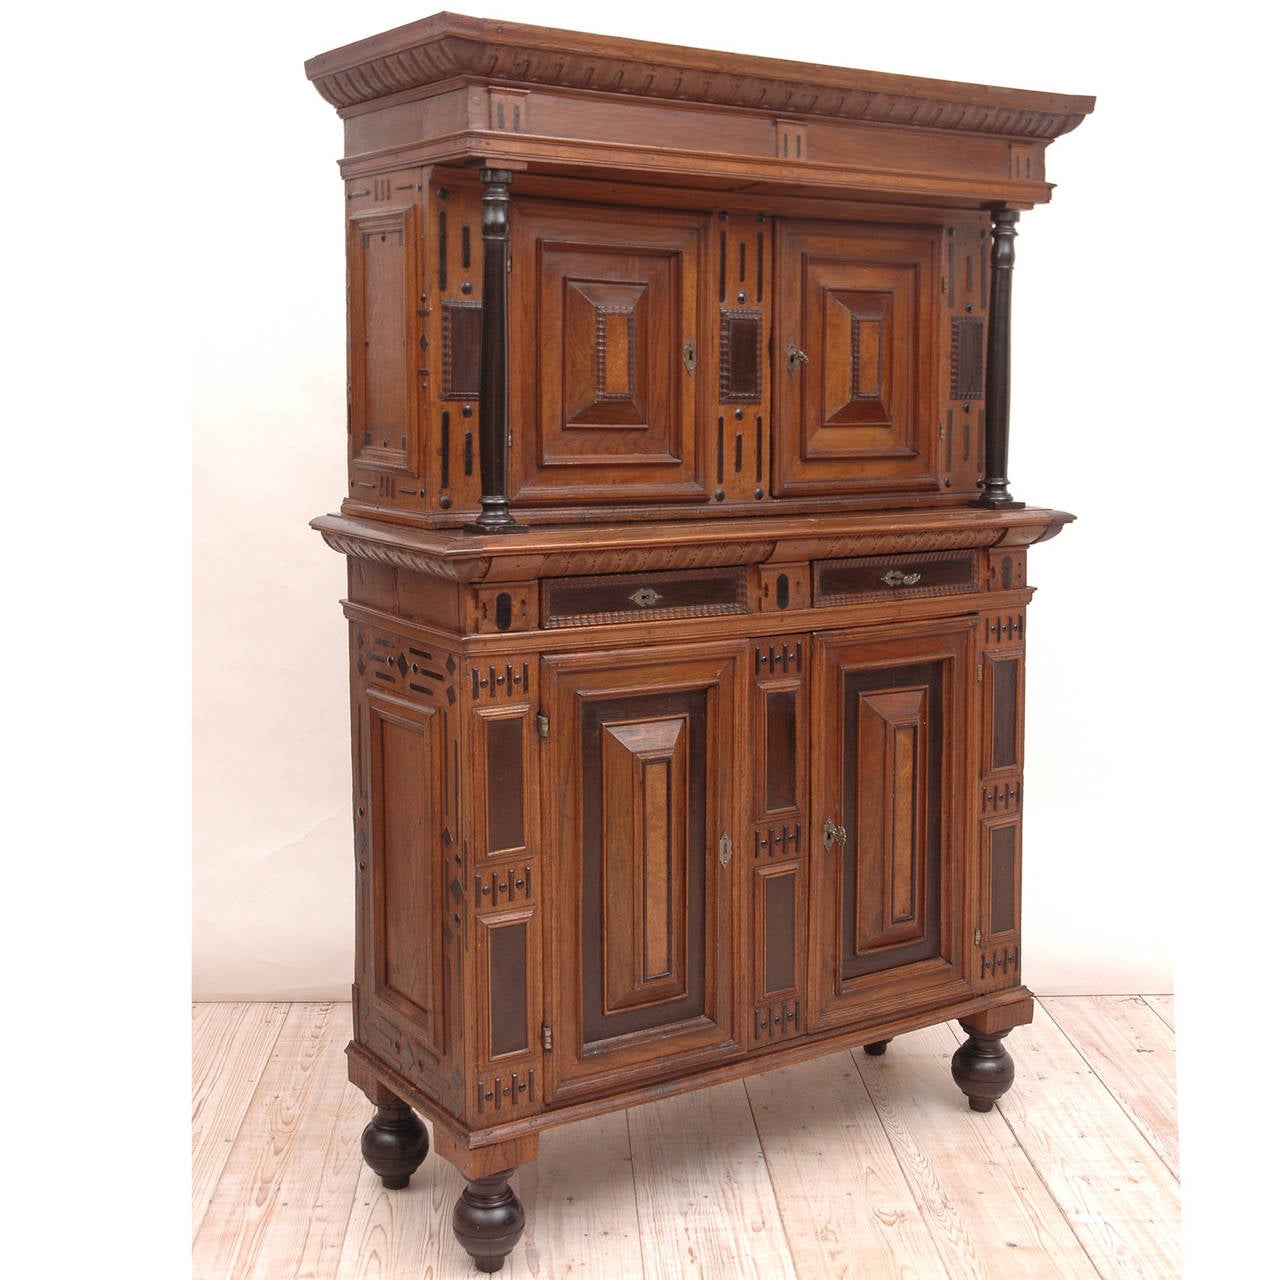 A Dutch Baroque cupboard in oak, rosewood, walnut and ebony with ebonized details, circa 1670. Original hinges and locks that are functioning with three original keys.
We have many more close-ups. Please request additional photos if you are